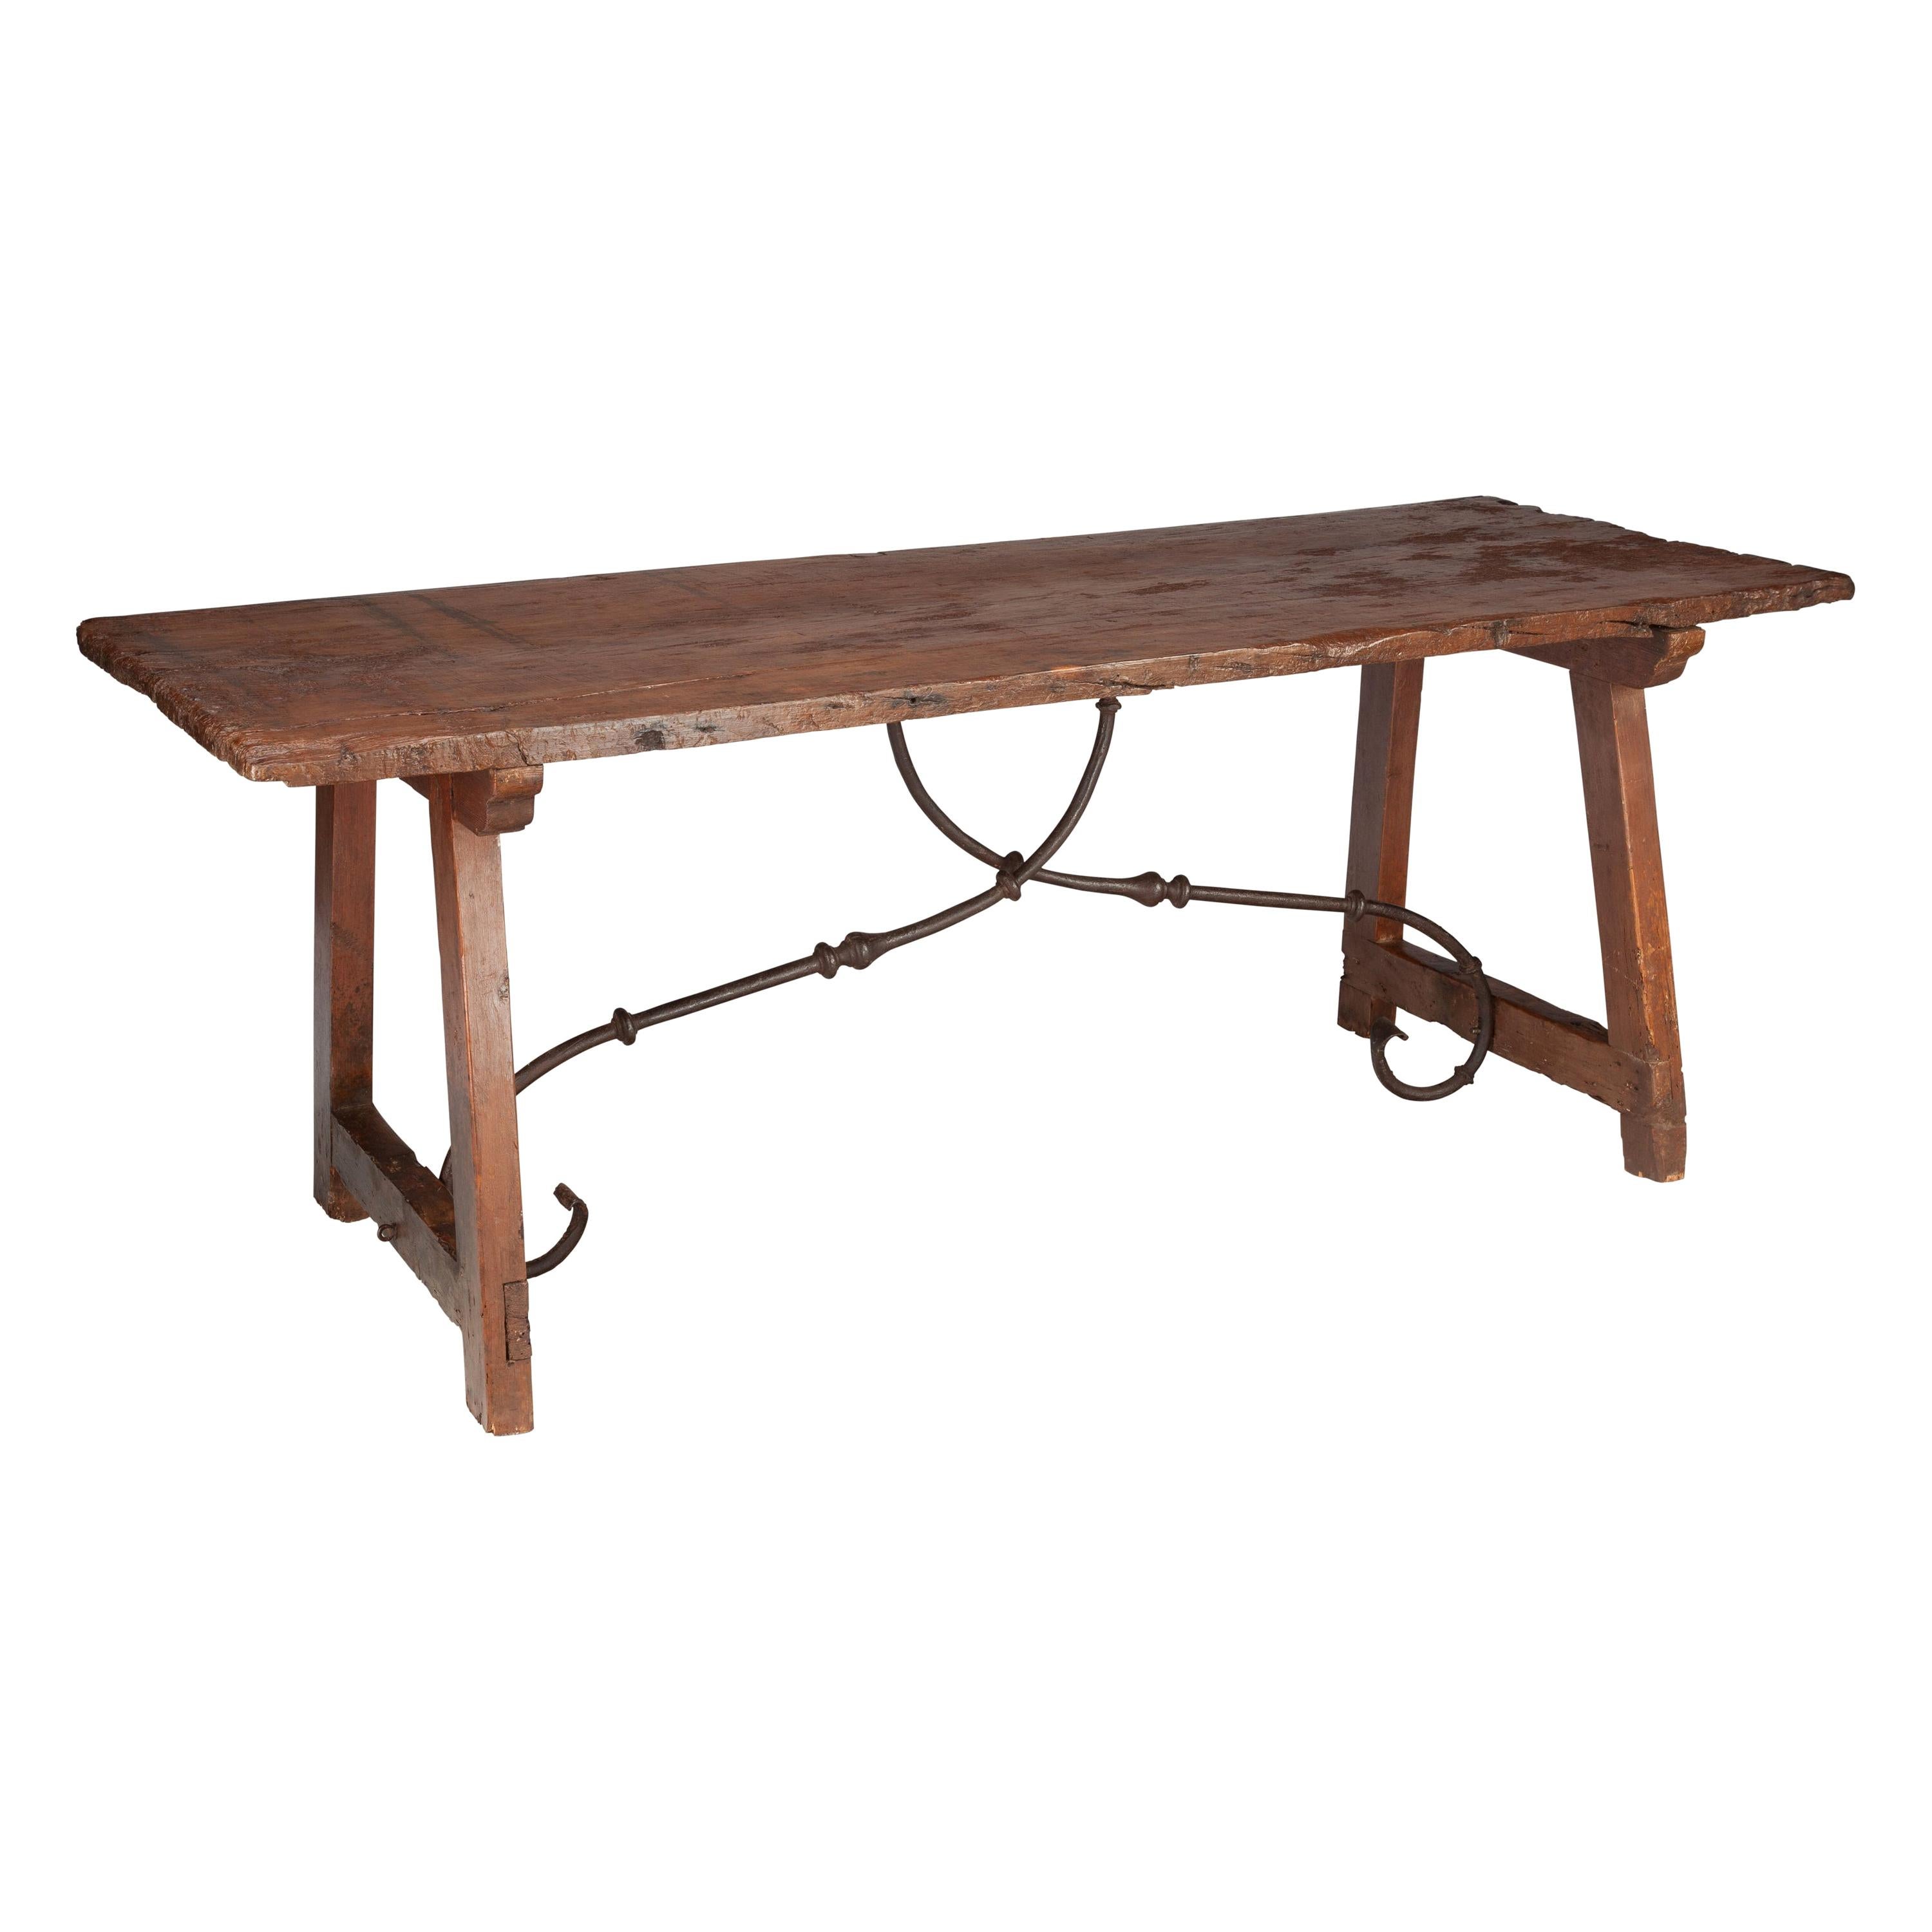 Spanish 18th Century Refectory Dining Table